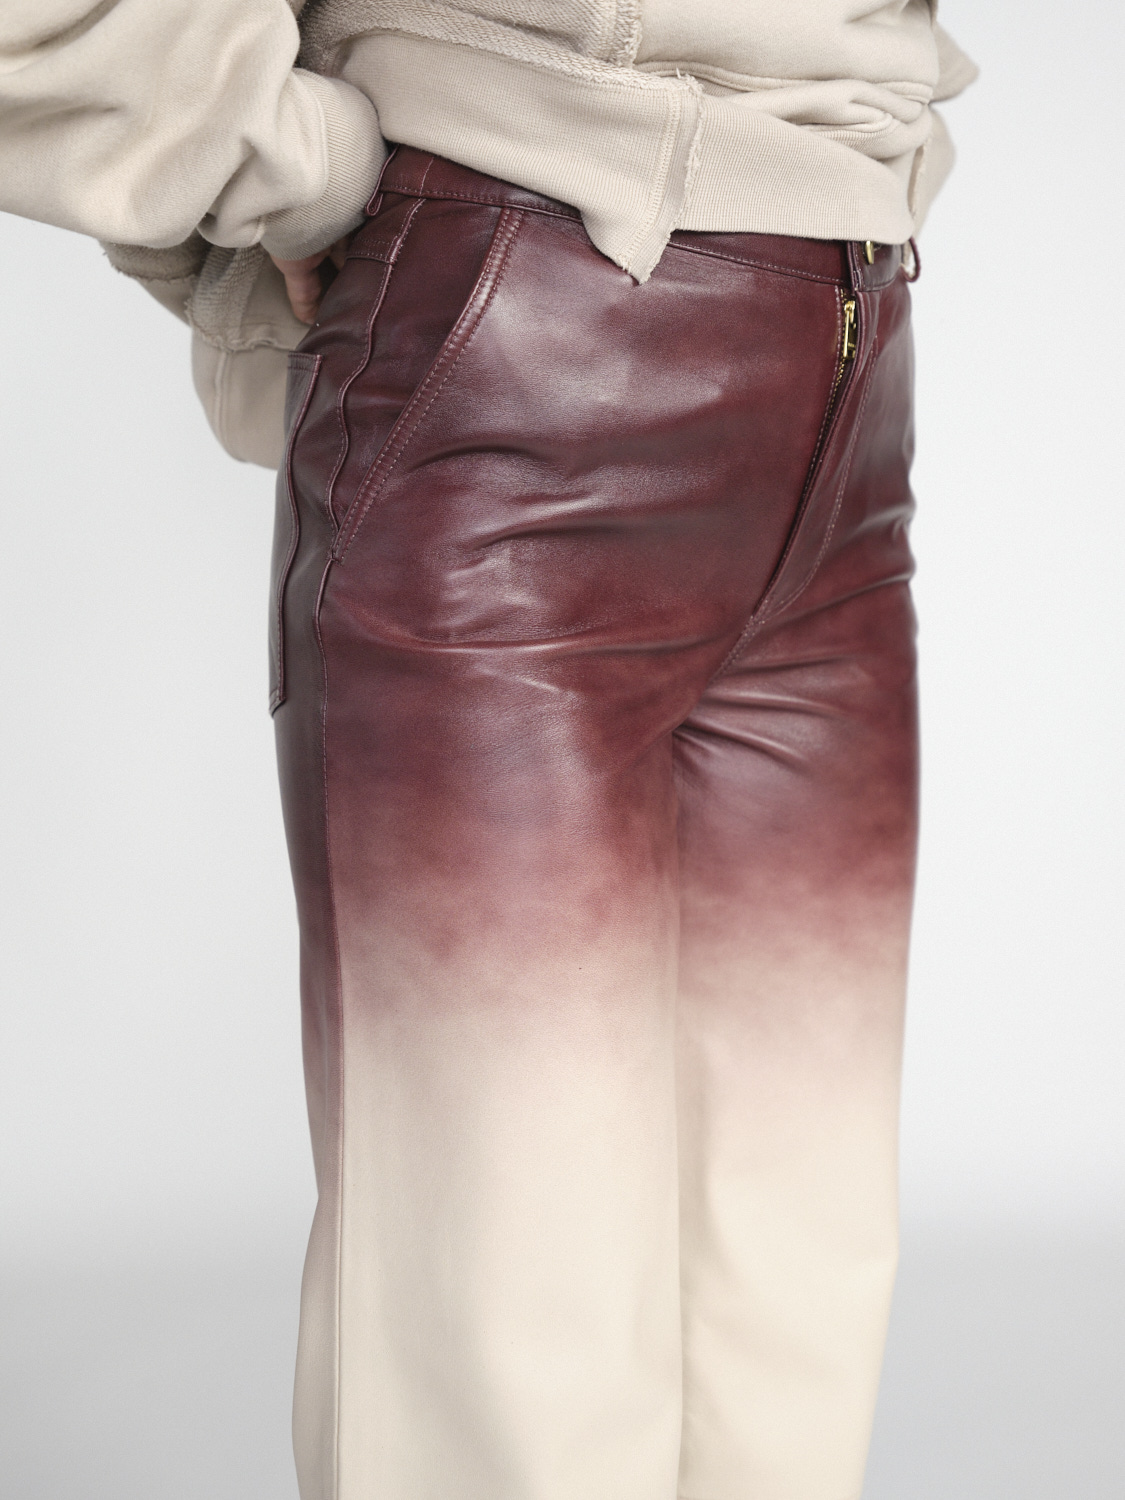 Arma Galizia – leather trousers with degradé effect  brown 34